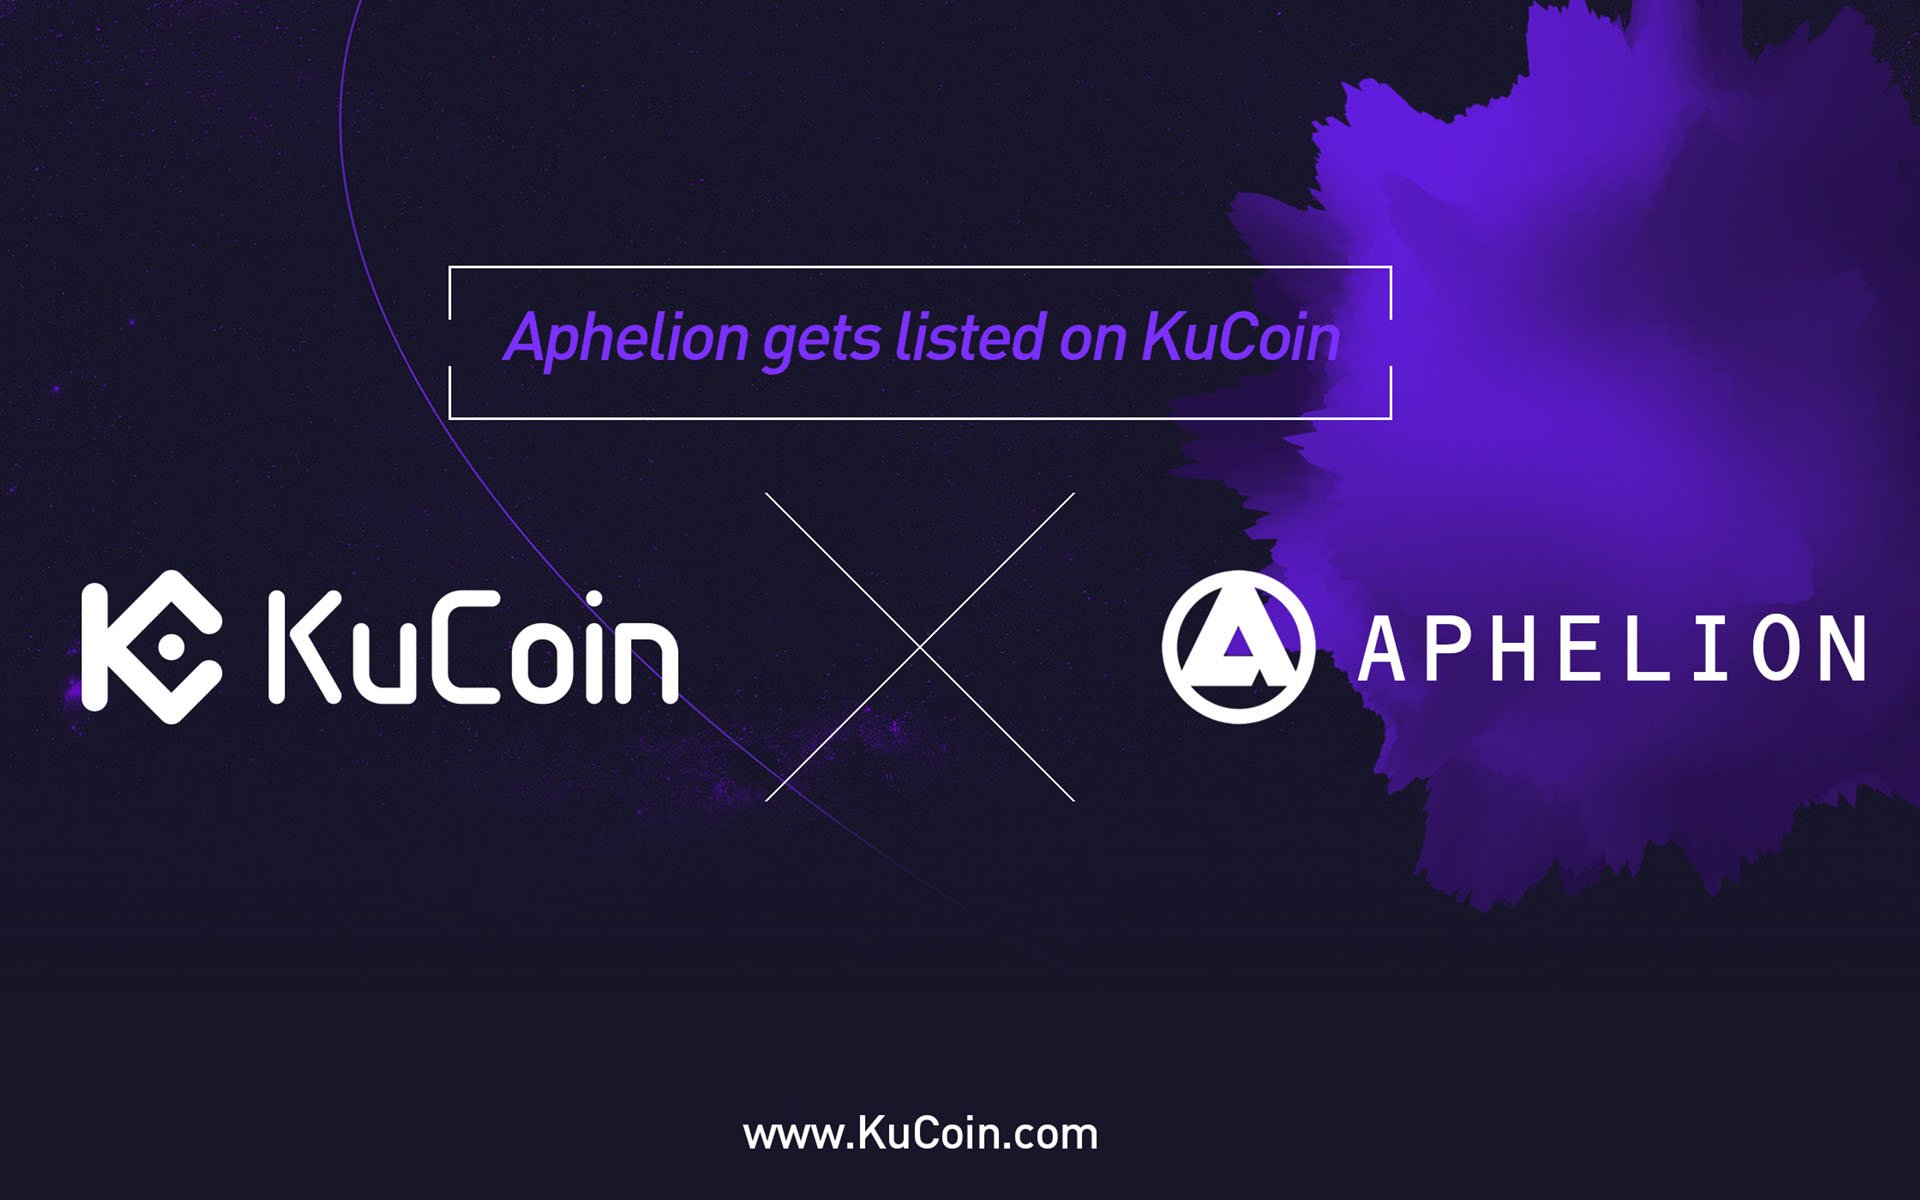 Aphelion (APH) Gets Listed on KuCoin!